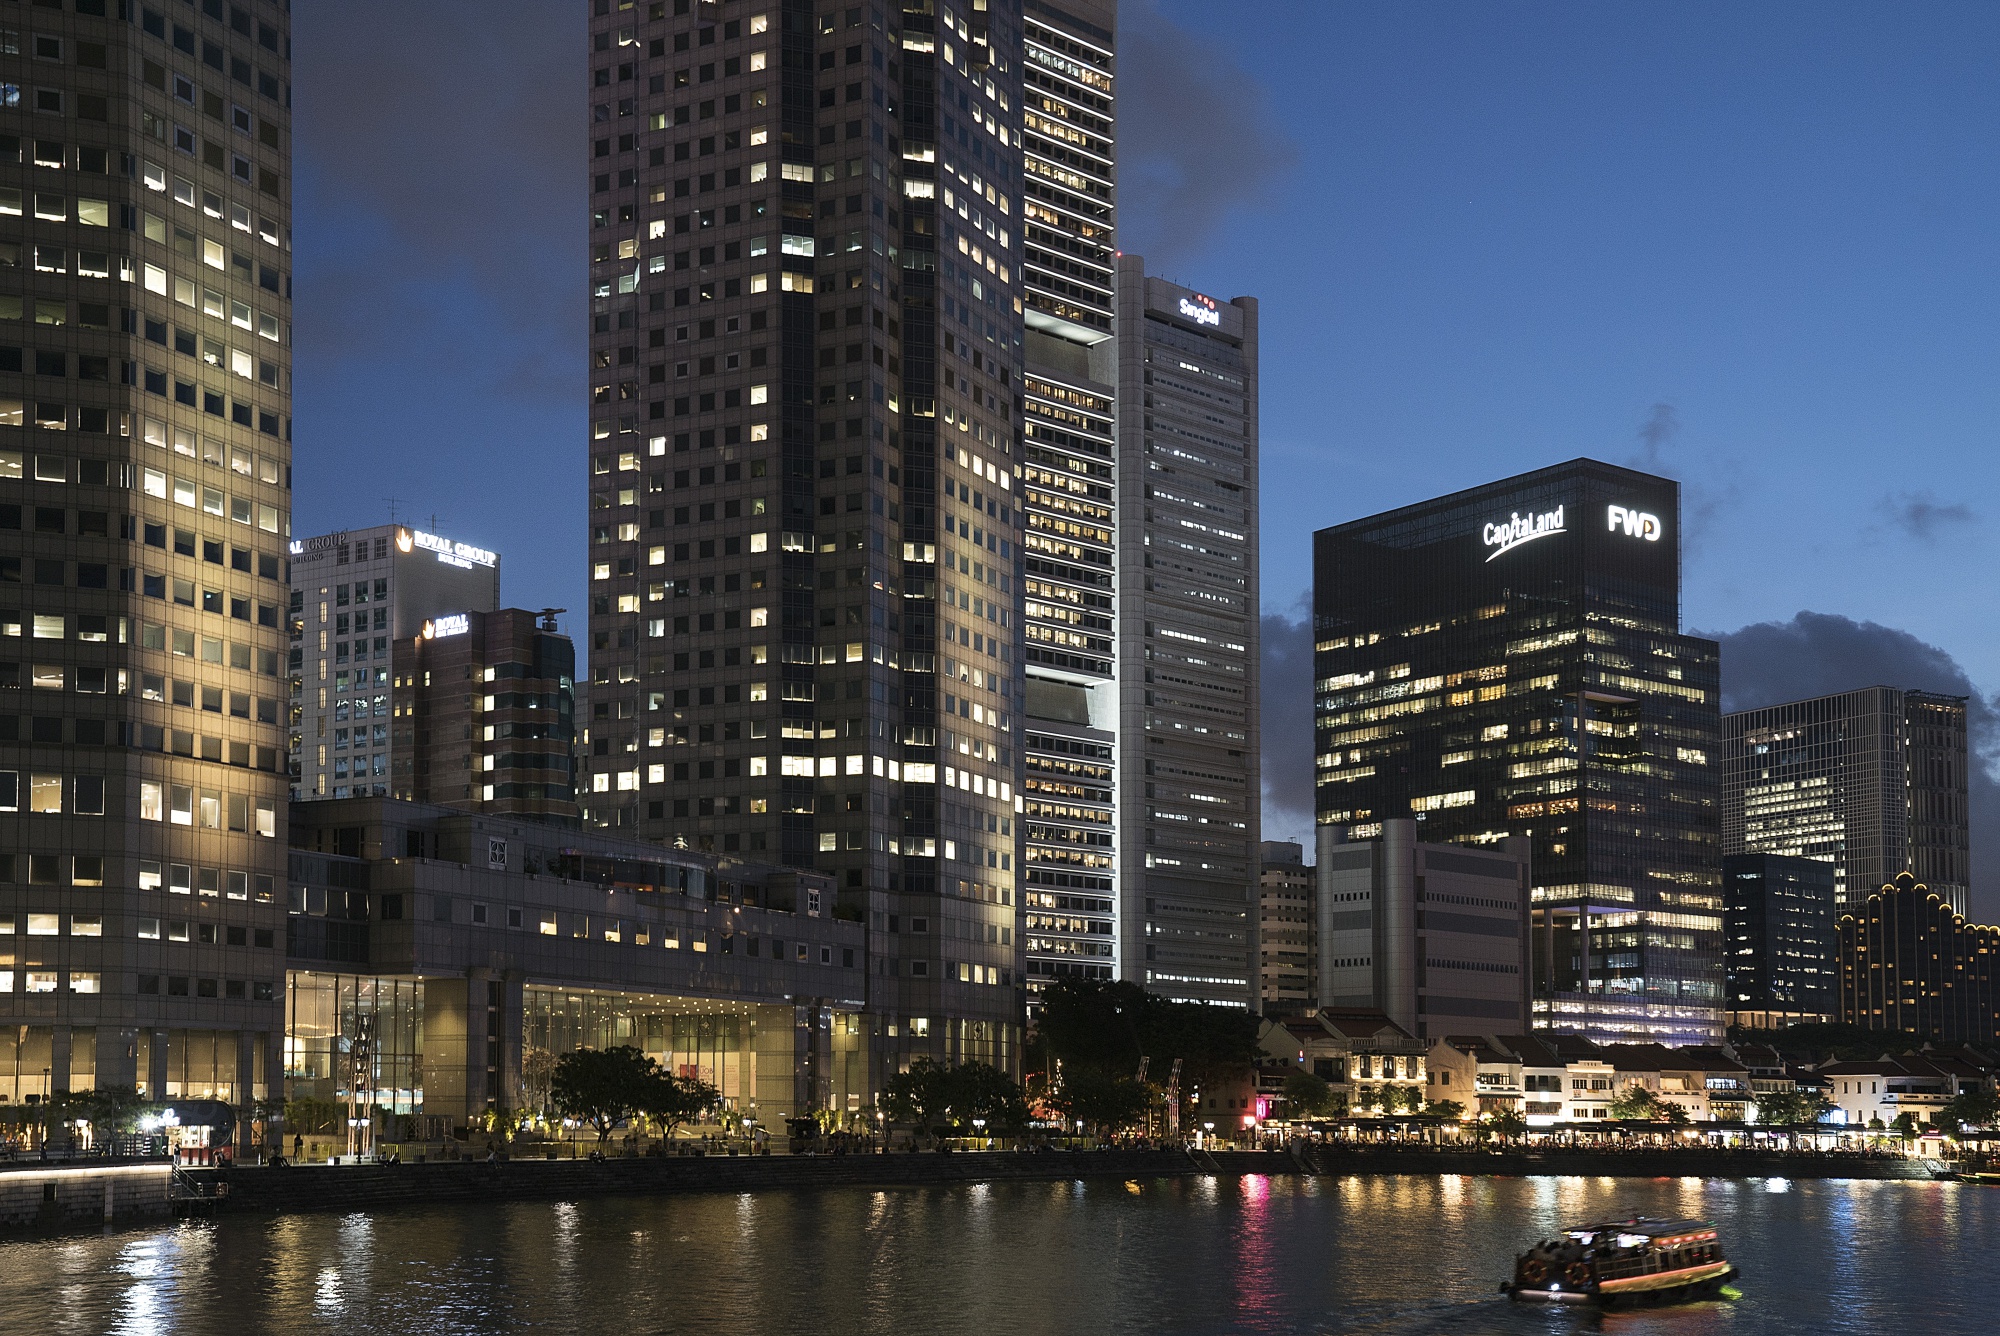 Commercial buildings in the central business district (CBD) stand in Singapore.